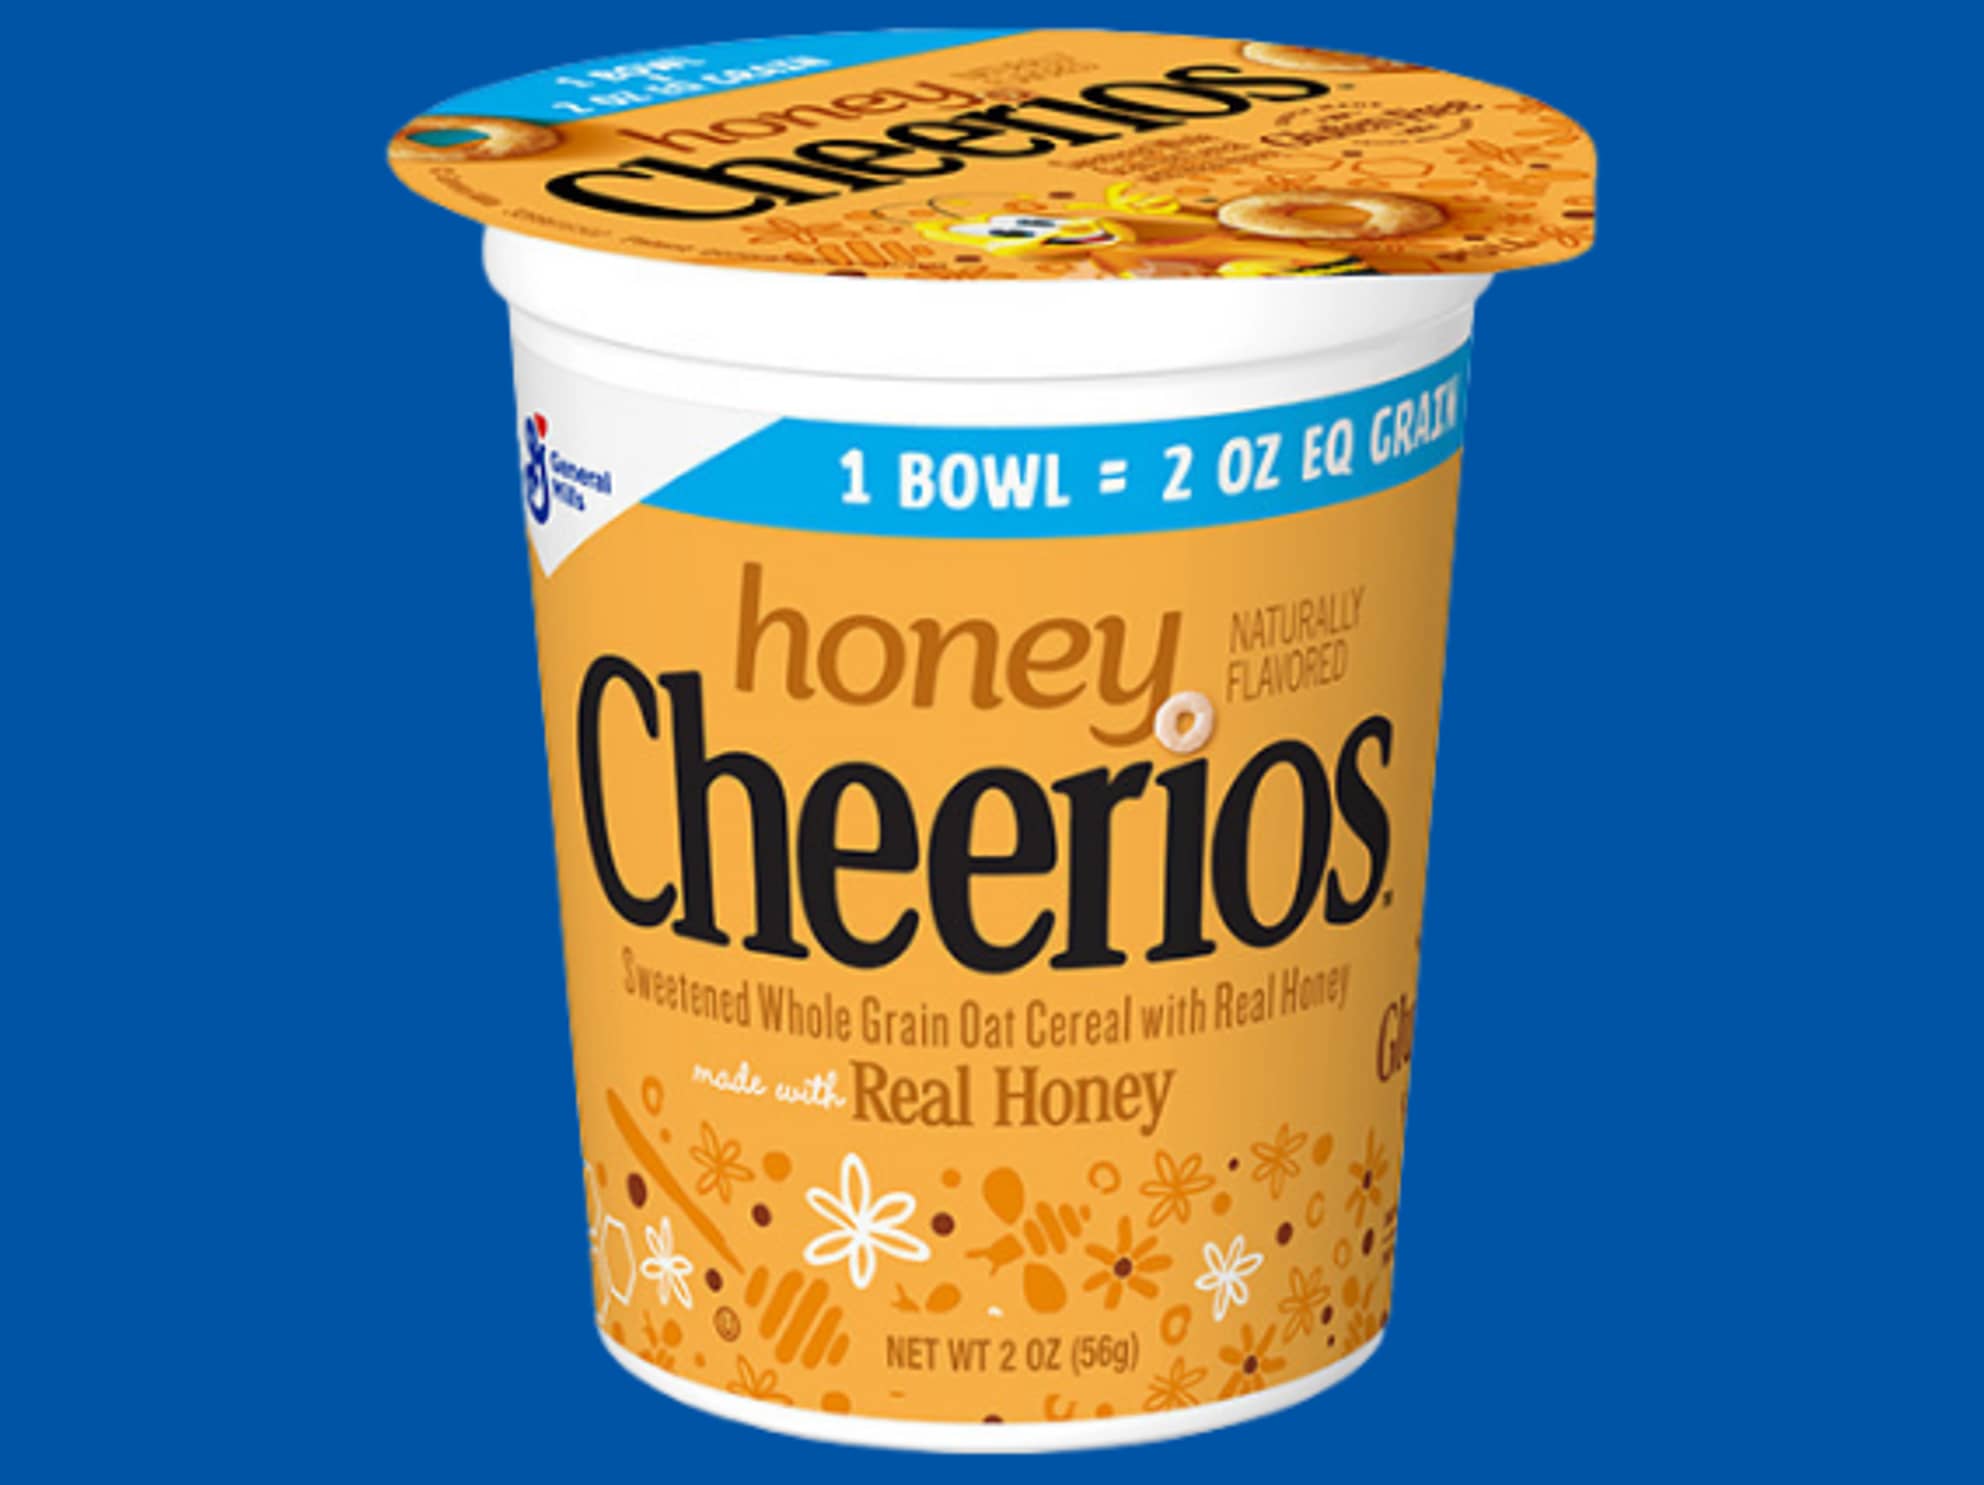 Honey Cheerios were made just for schools - General Mills